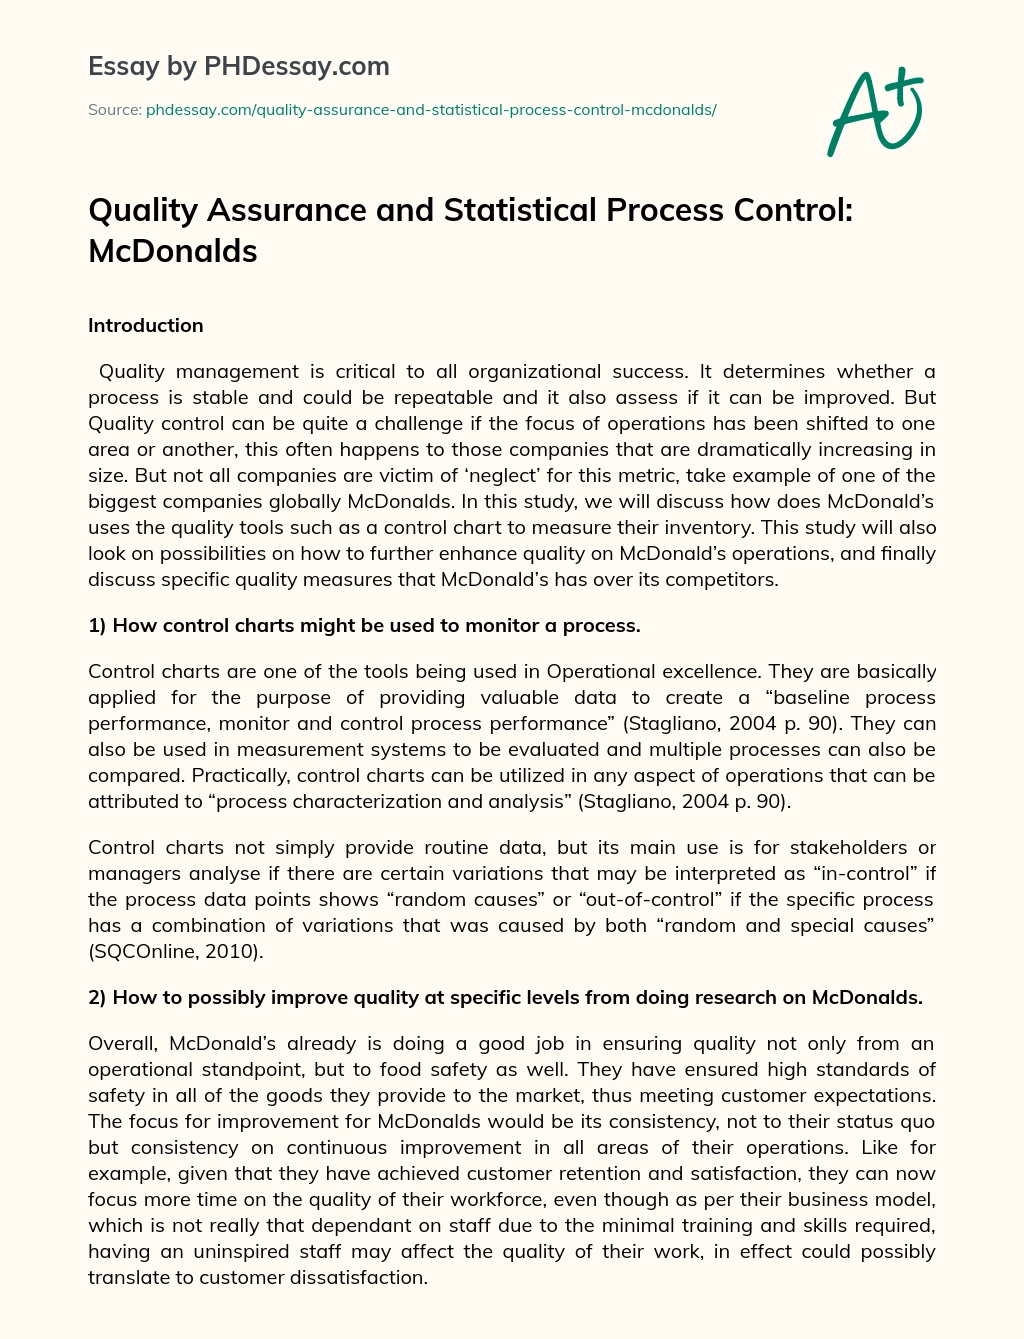 Quality Assurance and Statistical Process Control: McDonalds essay